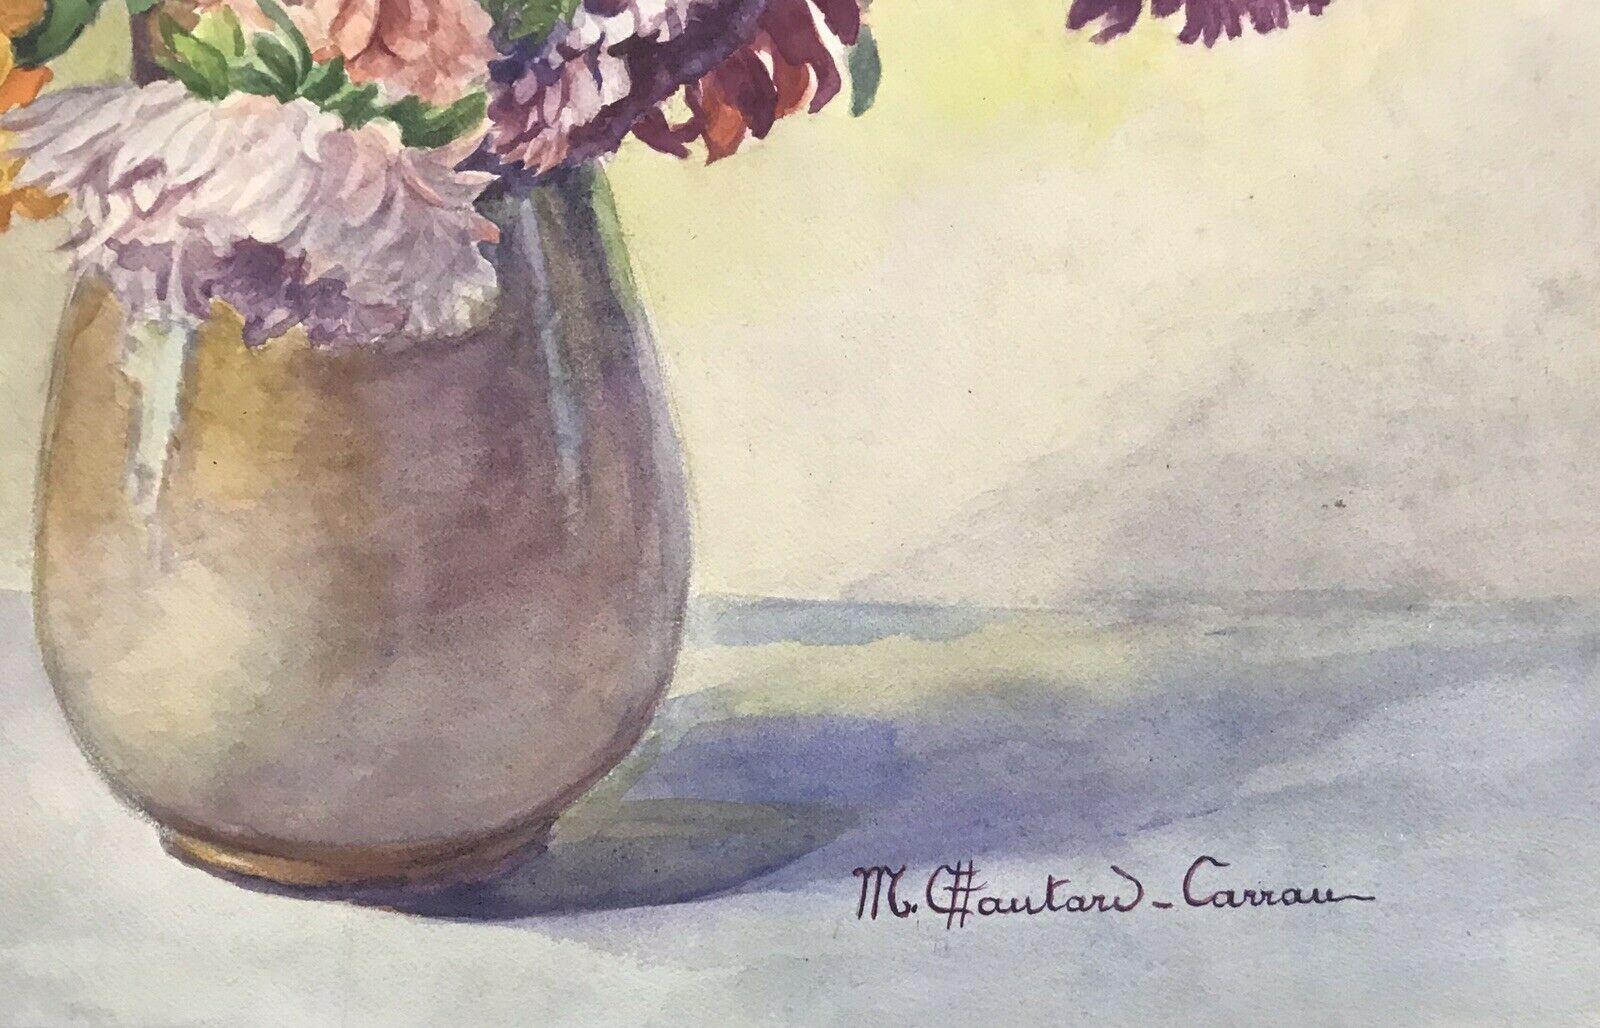 MARIE CHAUTARD-CARREAU - FINE EARLY 20thC FRENCH IMPRESSIONIST- FLOWERS IN VASE 1